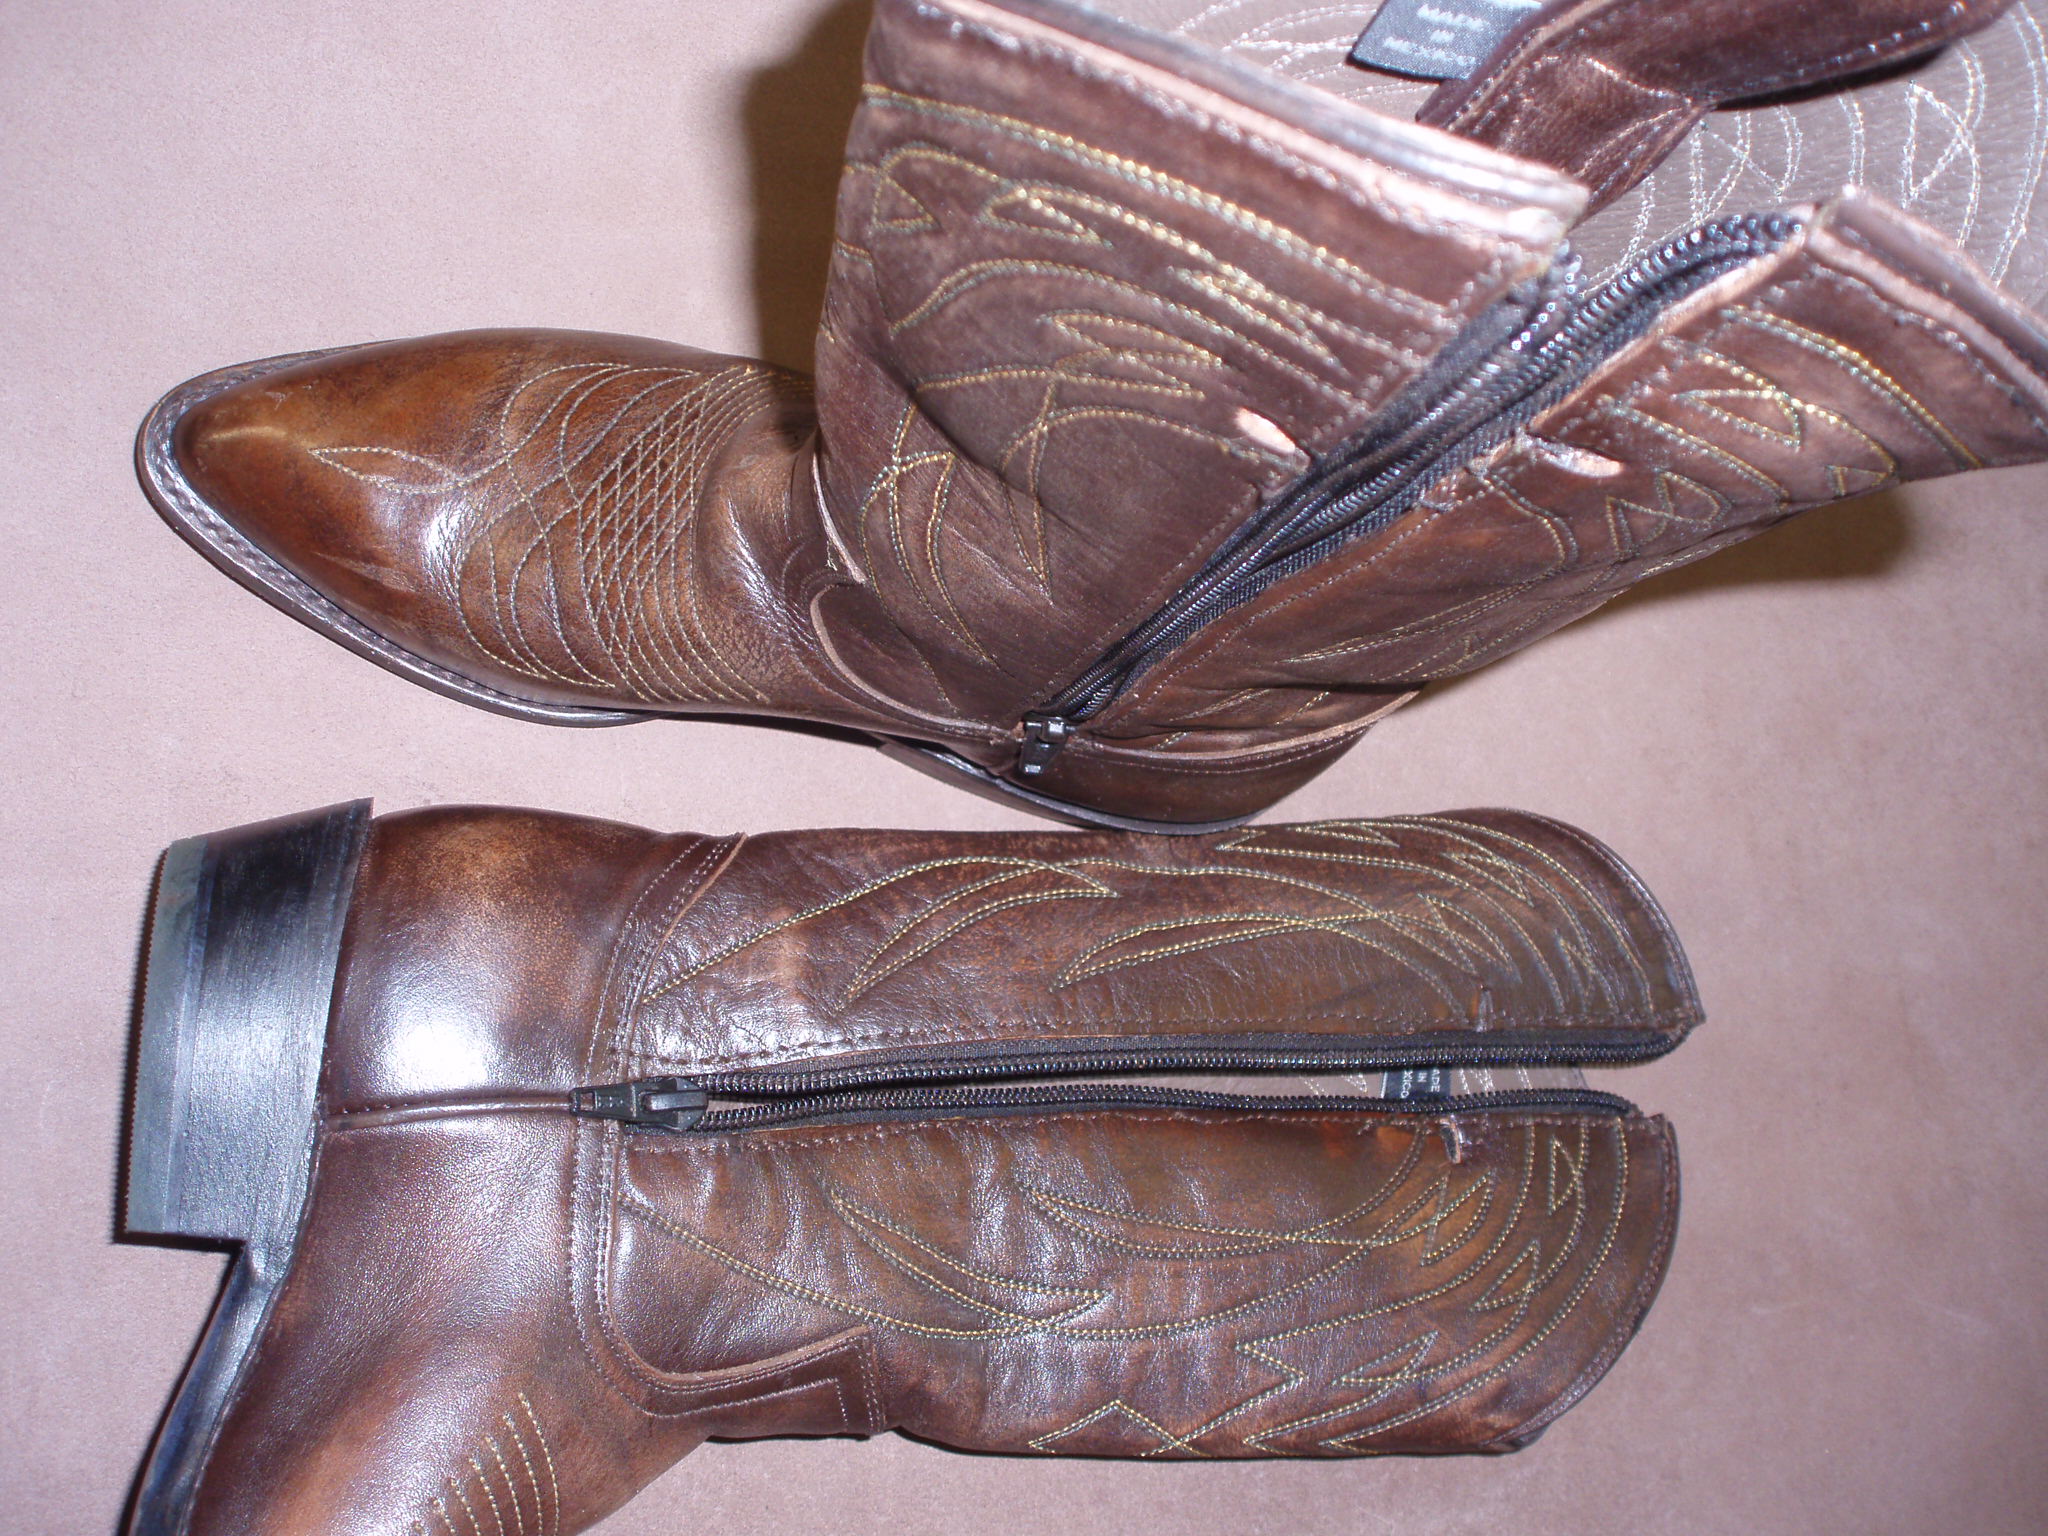 Western boots with zippers we installed.